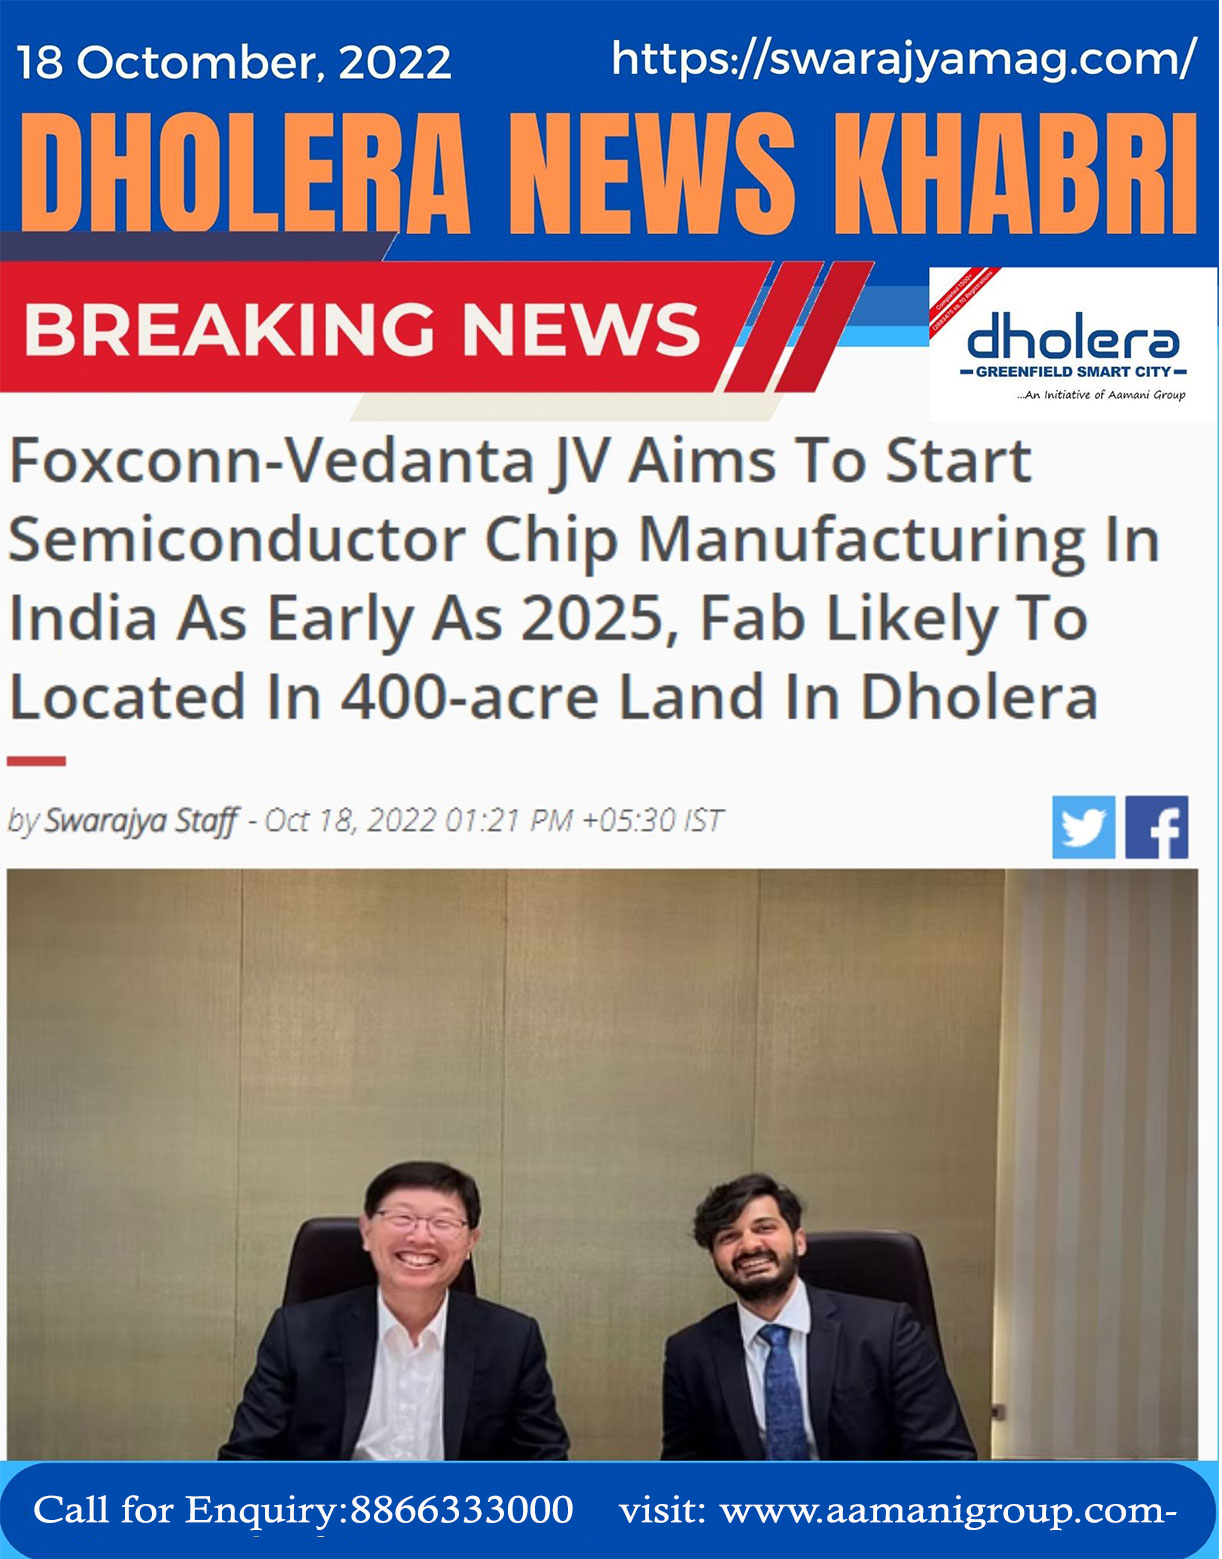 Foxconn-Vedanta Jv Aims to Start Semiconductor Chip Manufacturing in India as Early as 2025, Fab Likely to Located in 400-Acre Land in Dholera